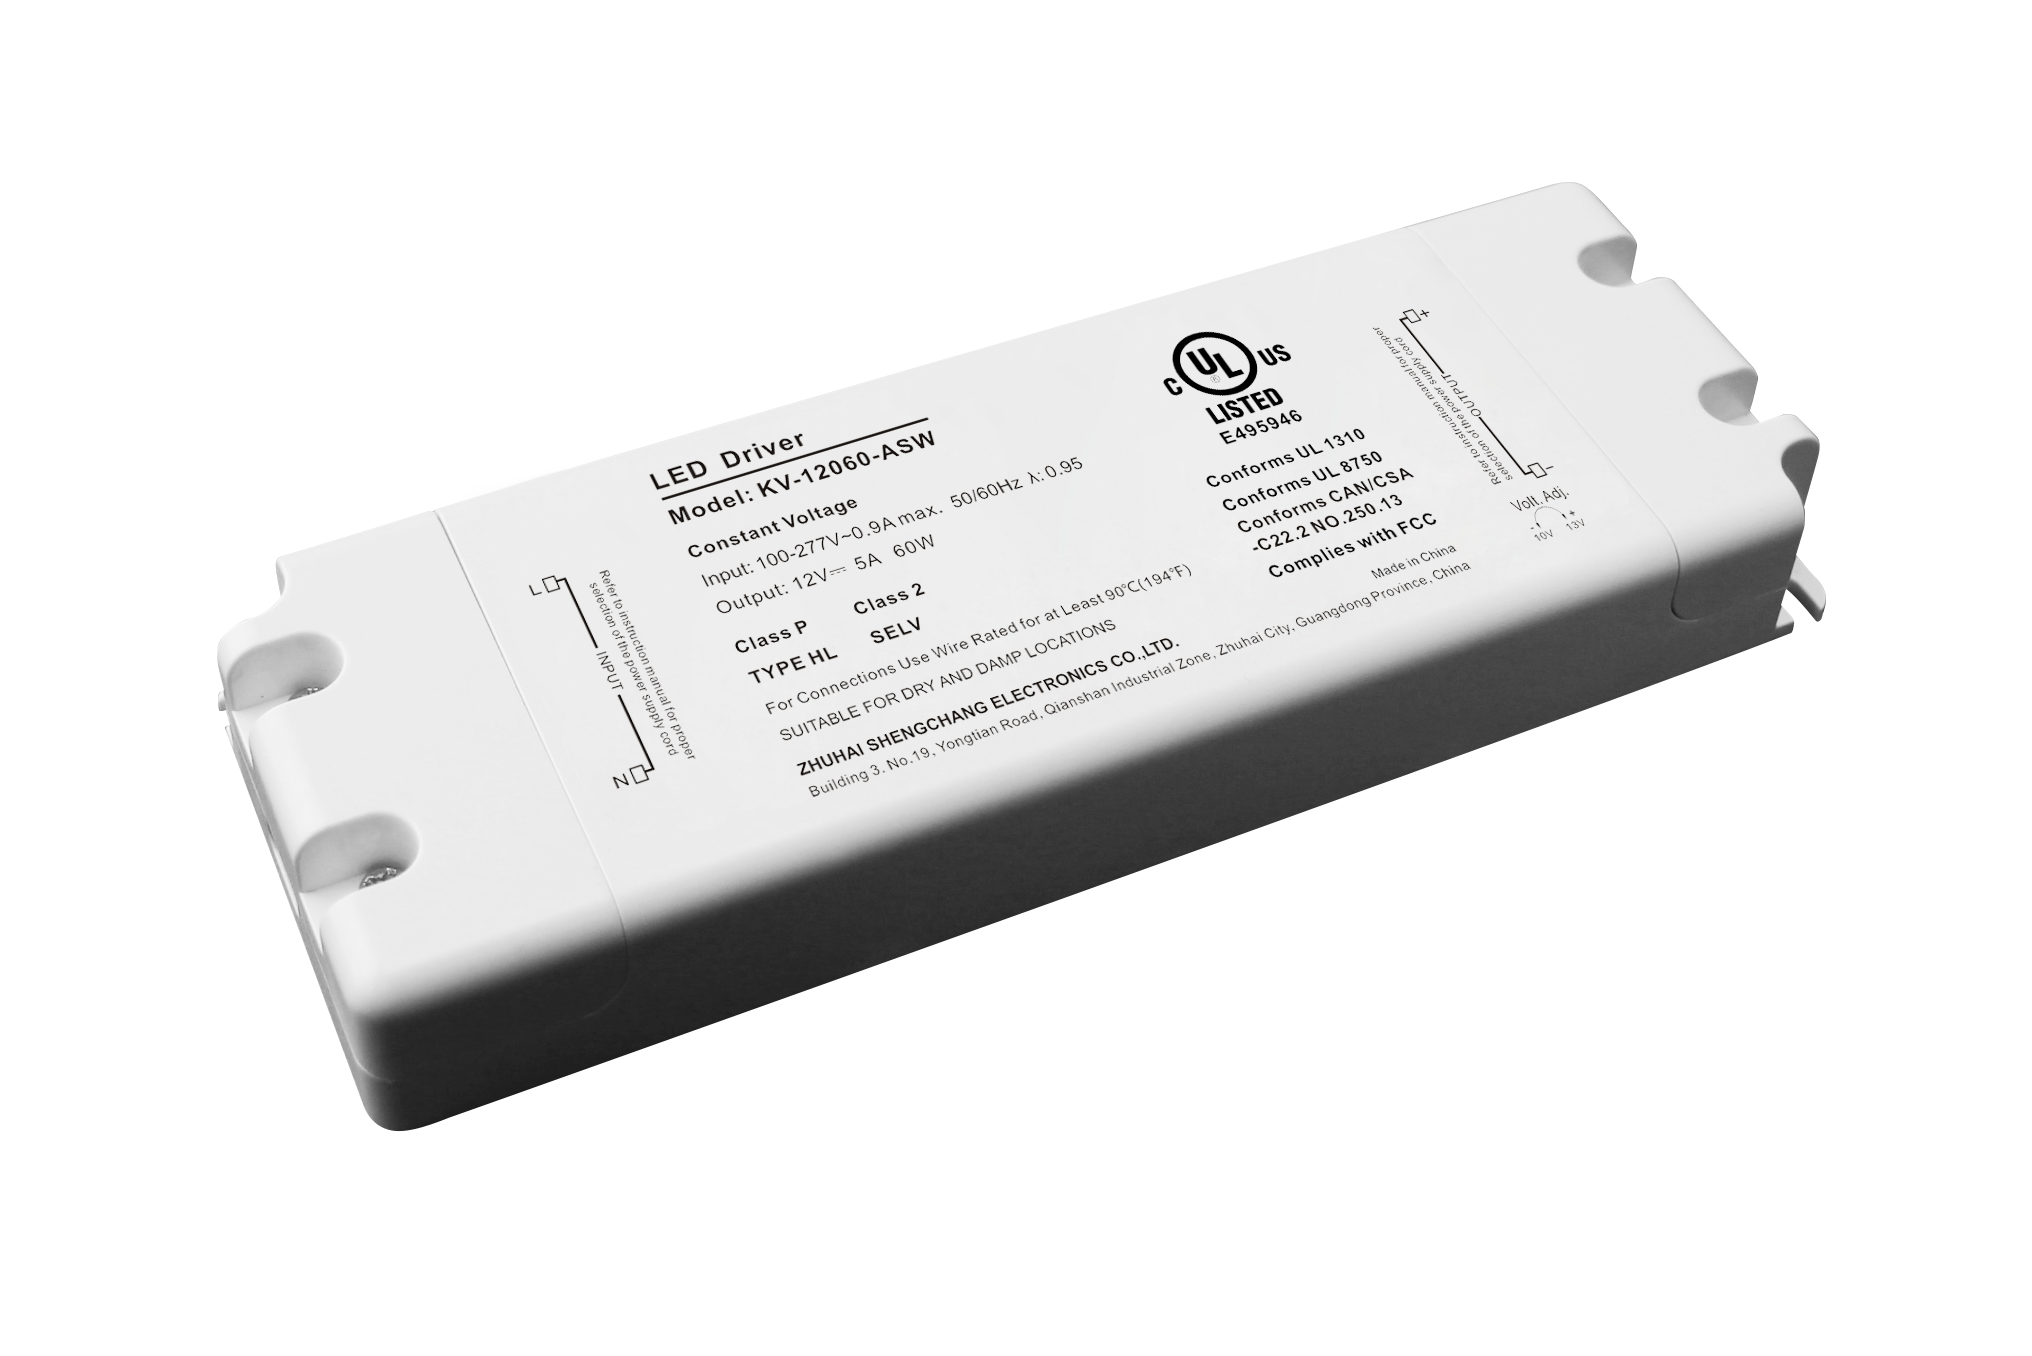 KV-ASW Series 60W Constant Voltage Non-Dimming LED Driver